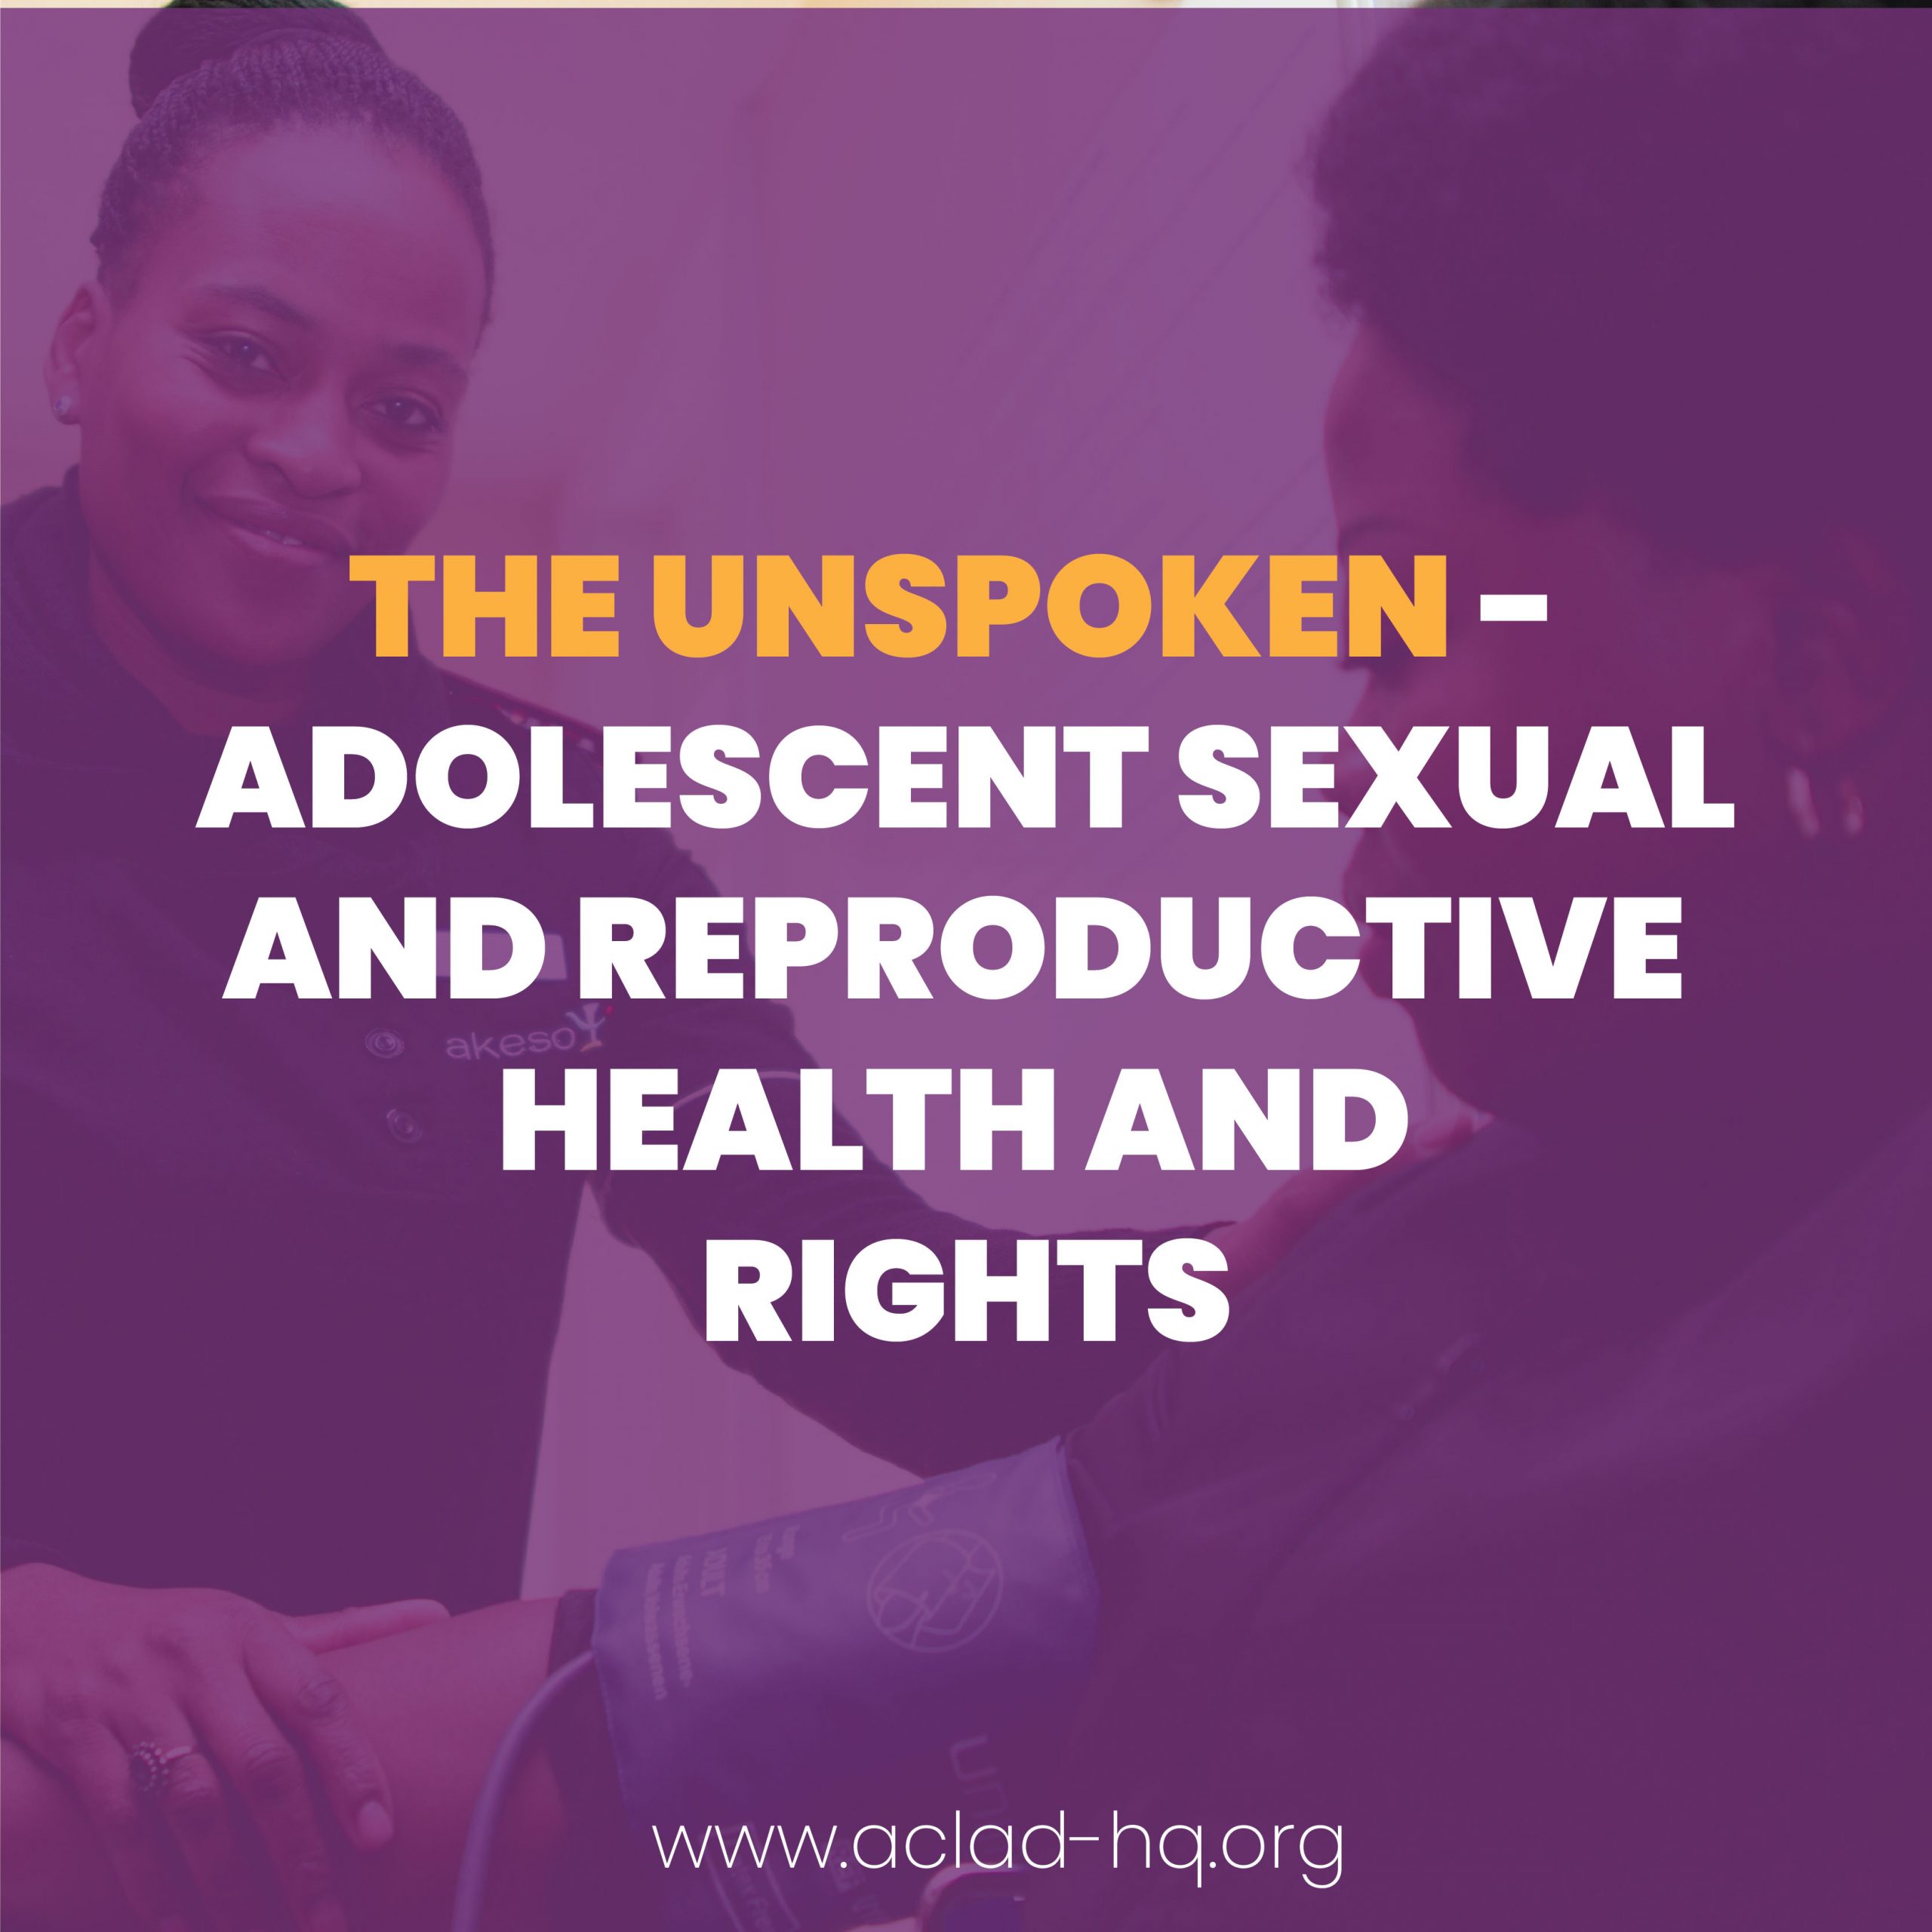 The Unspoken-adolescent sexual and reproductive health and rights